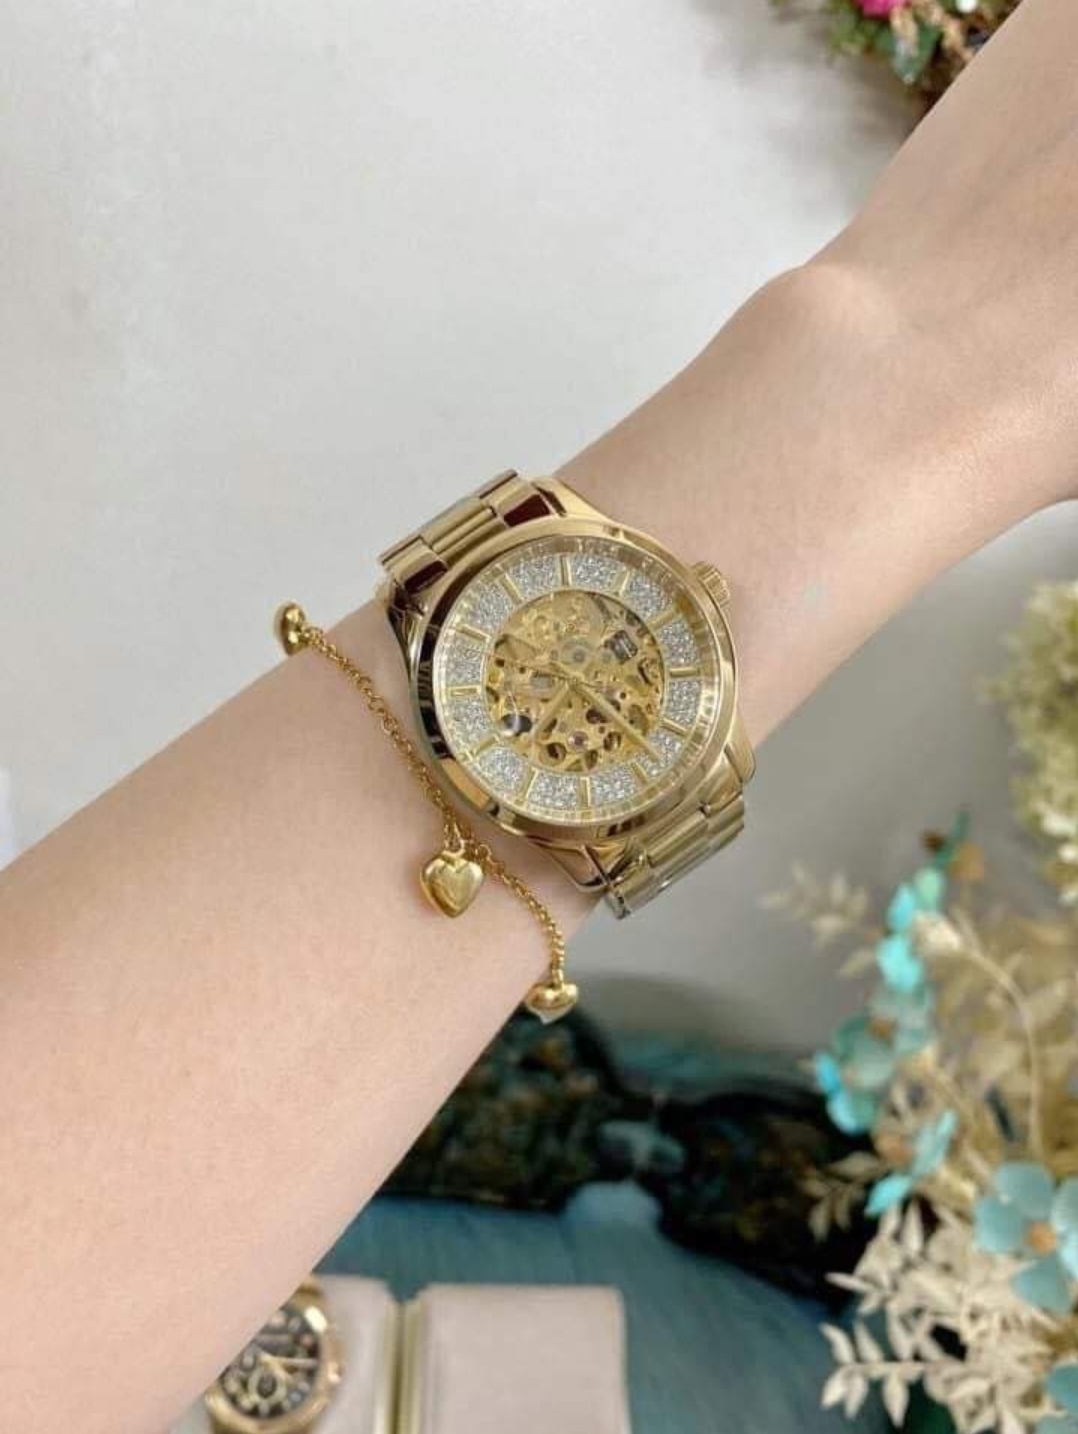 Michael Kors launches Access Gen 6 Bradshaw smartwatch price starts Rs  24995  Times of India